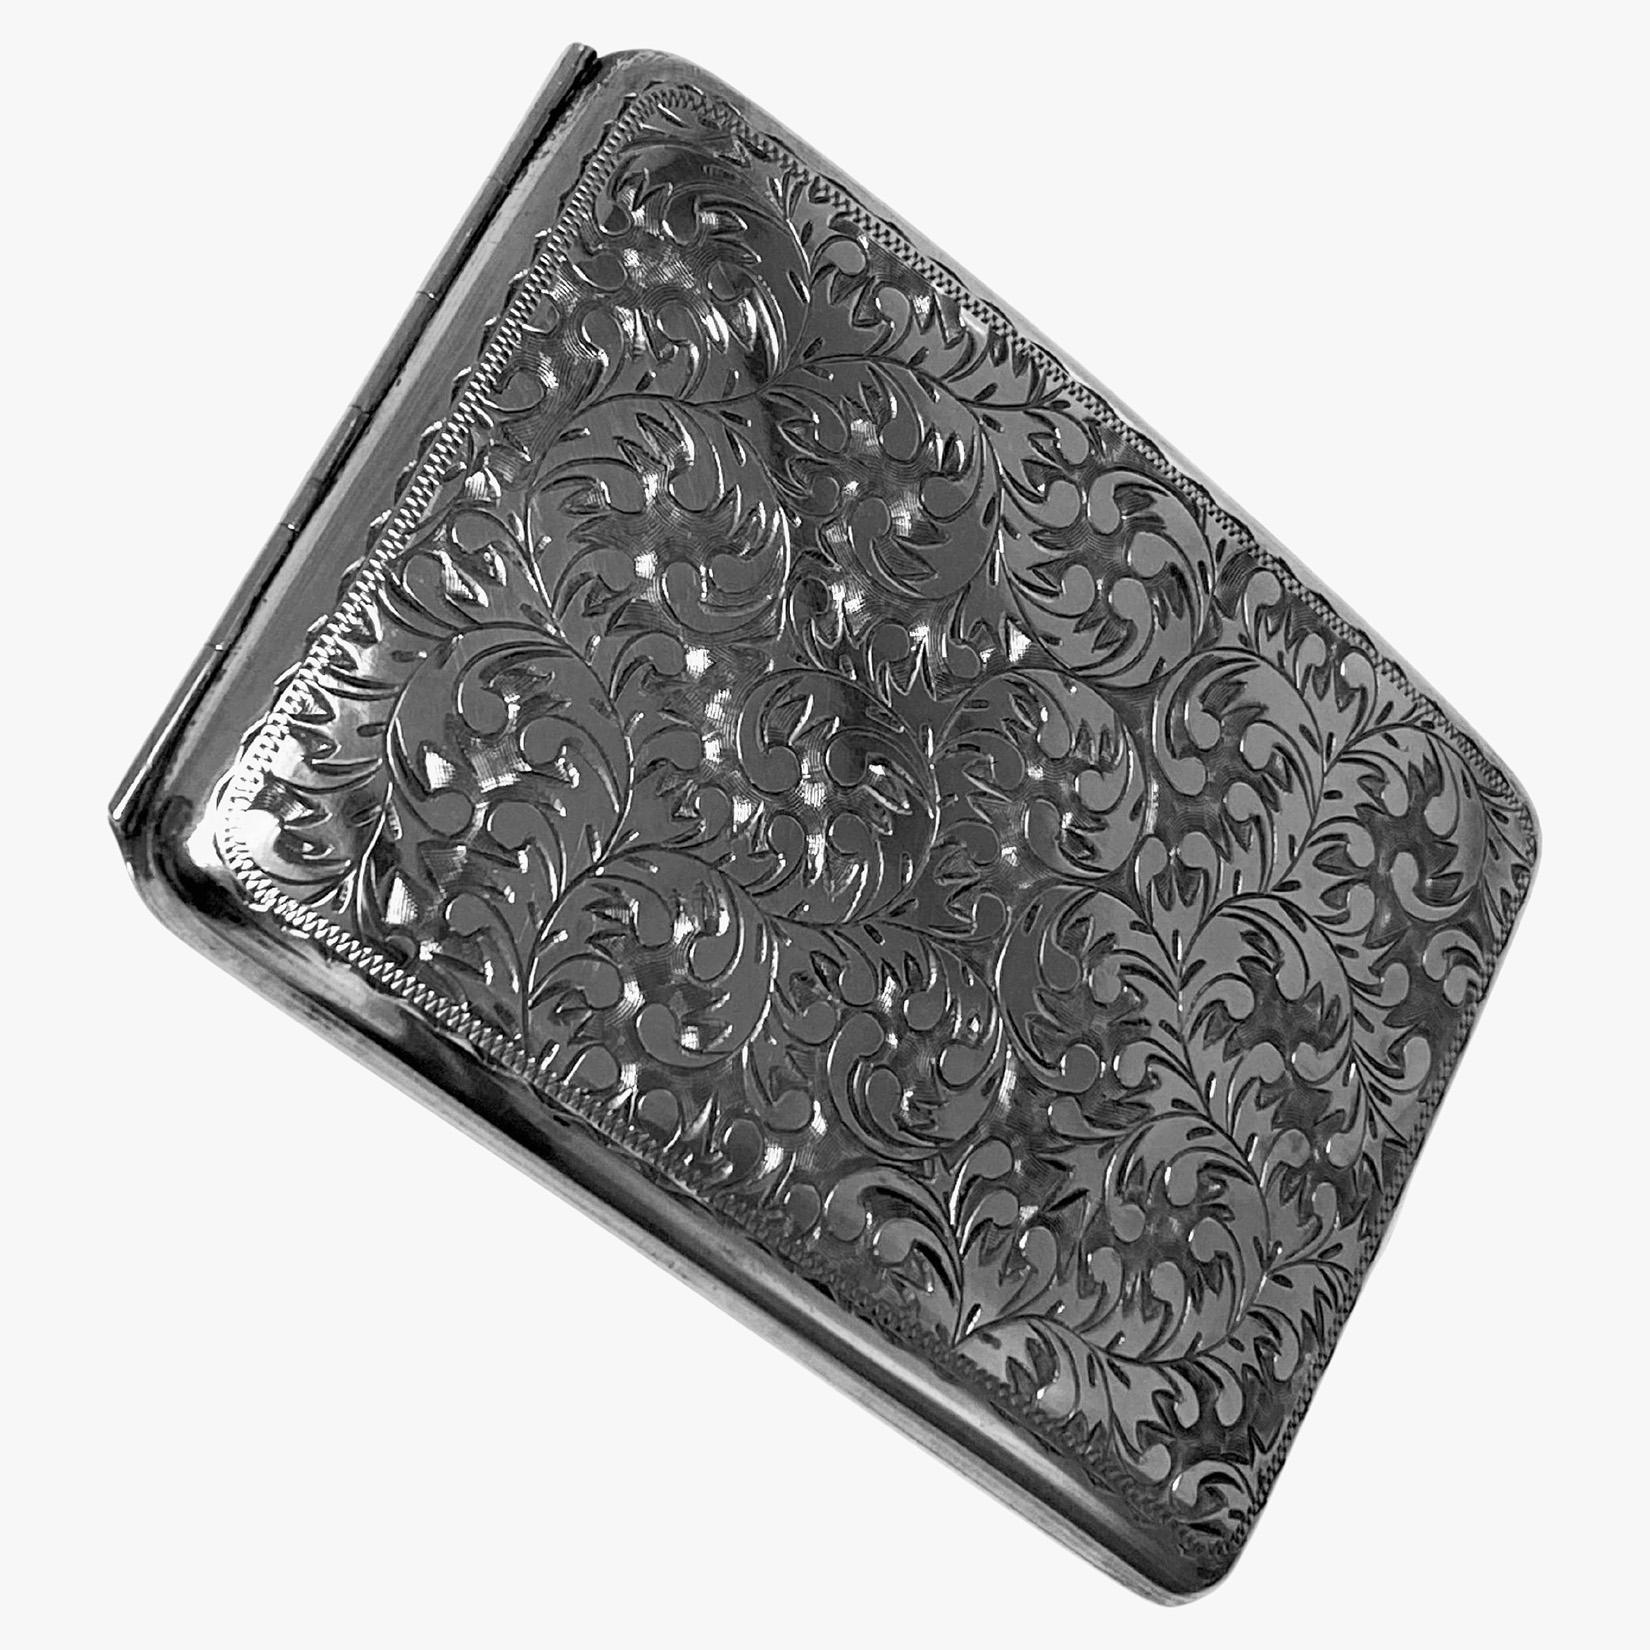 Antique Japanese sterling 950 pure silver cigarette case C.1910. Rectangular concave form, rich engraved foliate decoration on front, the reverse plain with central lozenge shape engraved foliage conforming in design to front. Interior plain with